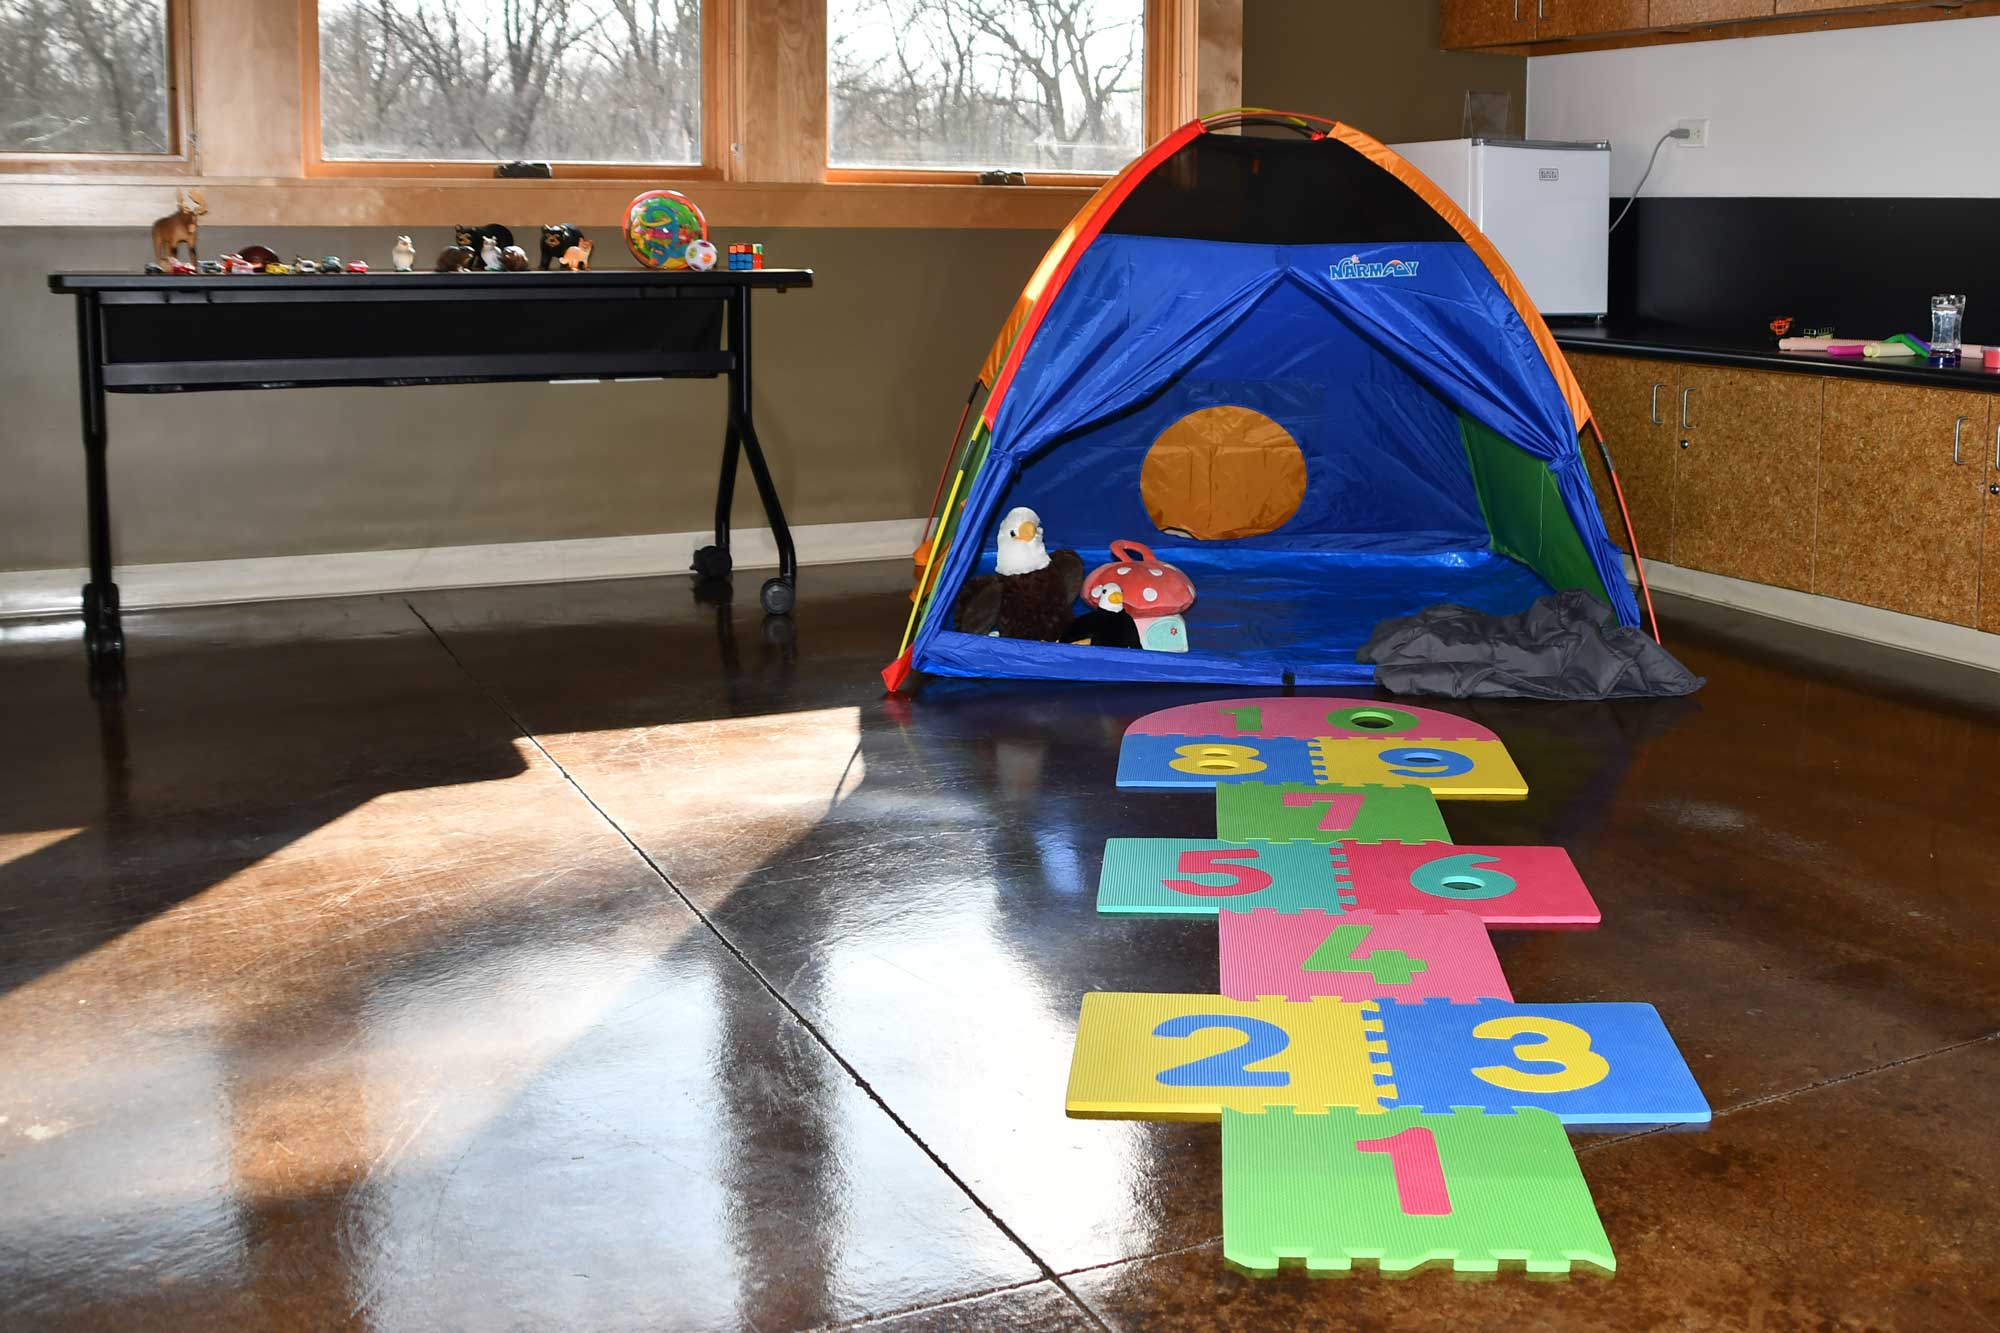 A quiet space set up inside a room with a small tent and toys.